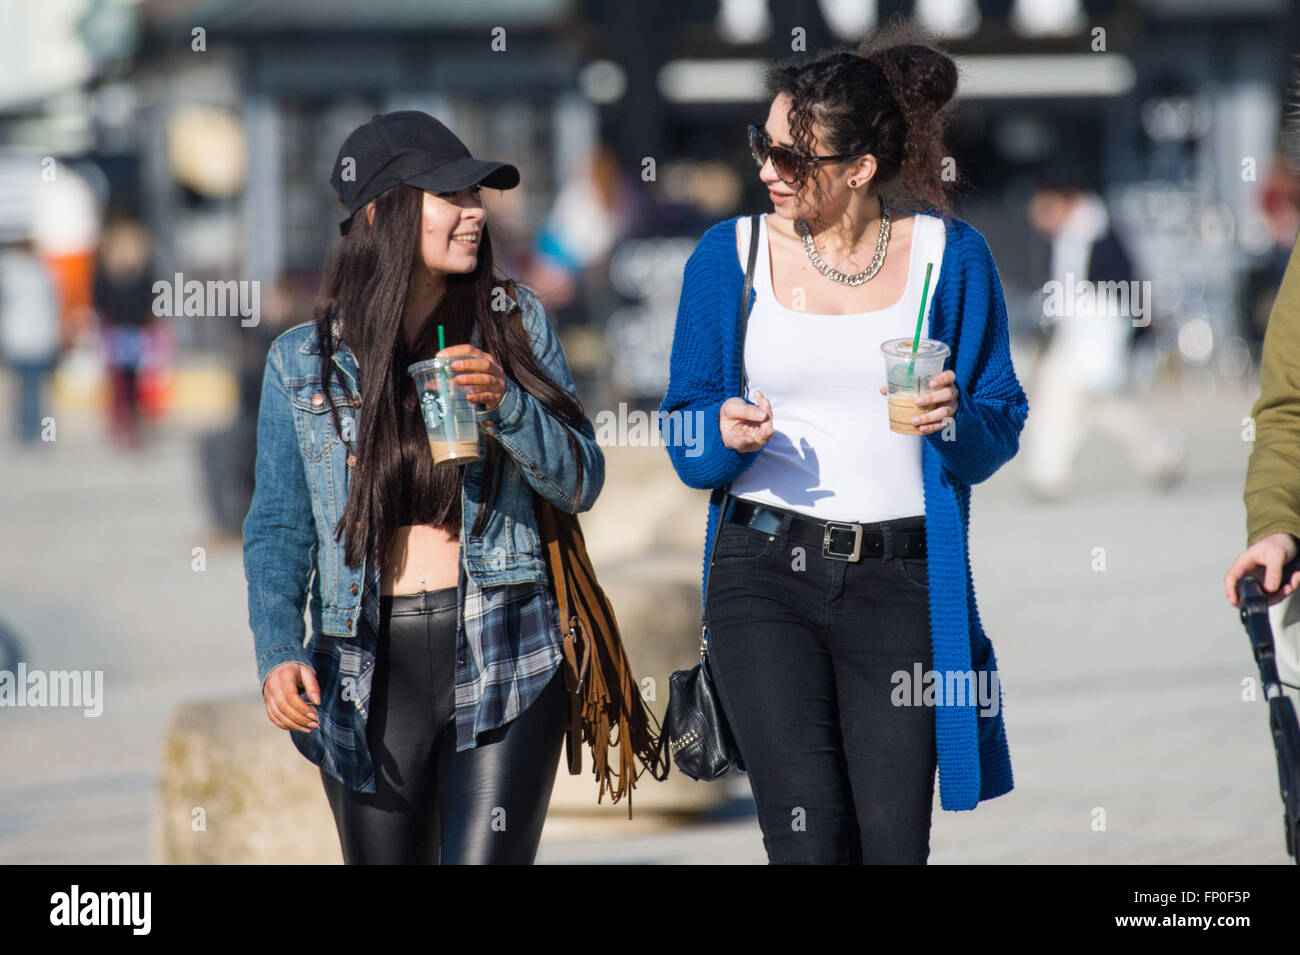 Aberystwyth Wales UK, Wednesday  16 March 2016   UK weather: Two young women  enjoying the warm spring sunshine in Aberystwyth , west Wales UK.   On another day of clear skies and warm sunshine the the temperture reached a high of 13ºc   Credit:  keith morris/Alamy Live News Stock Photo